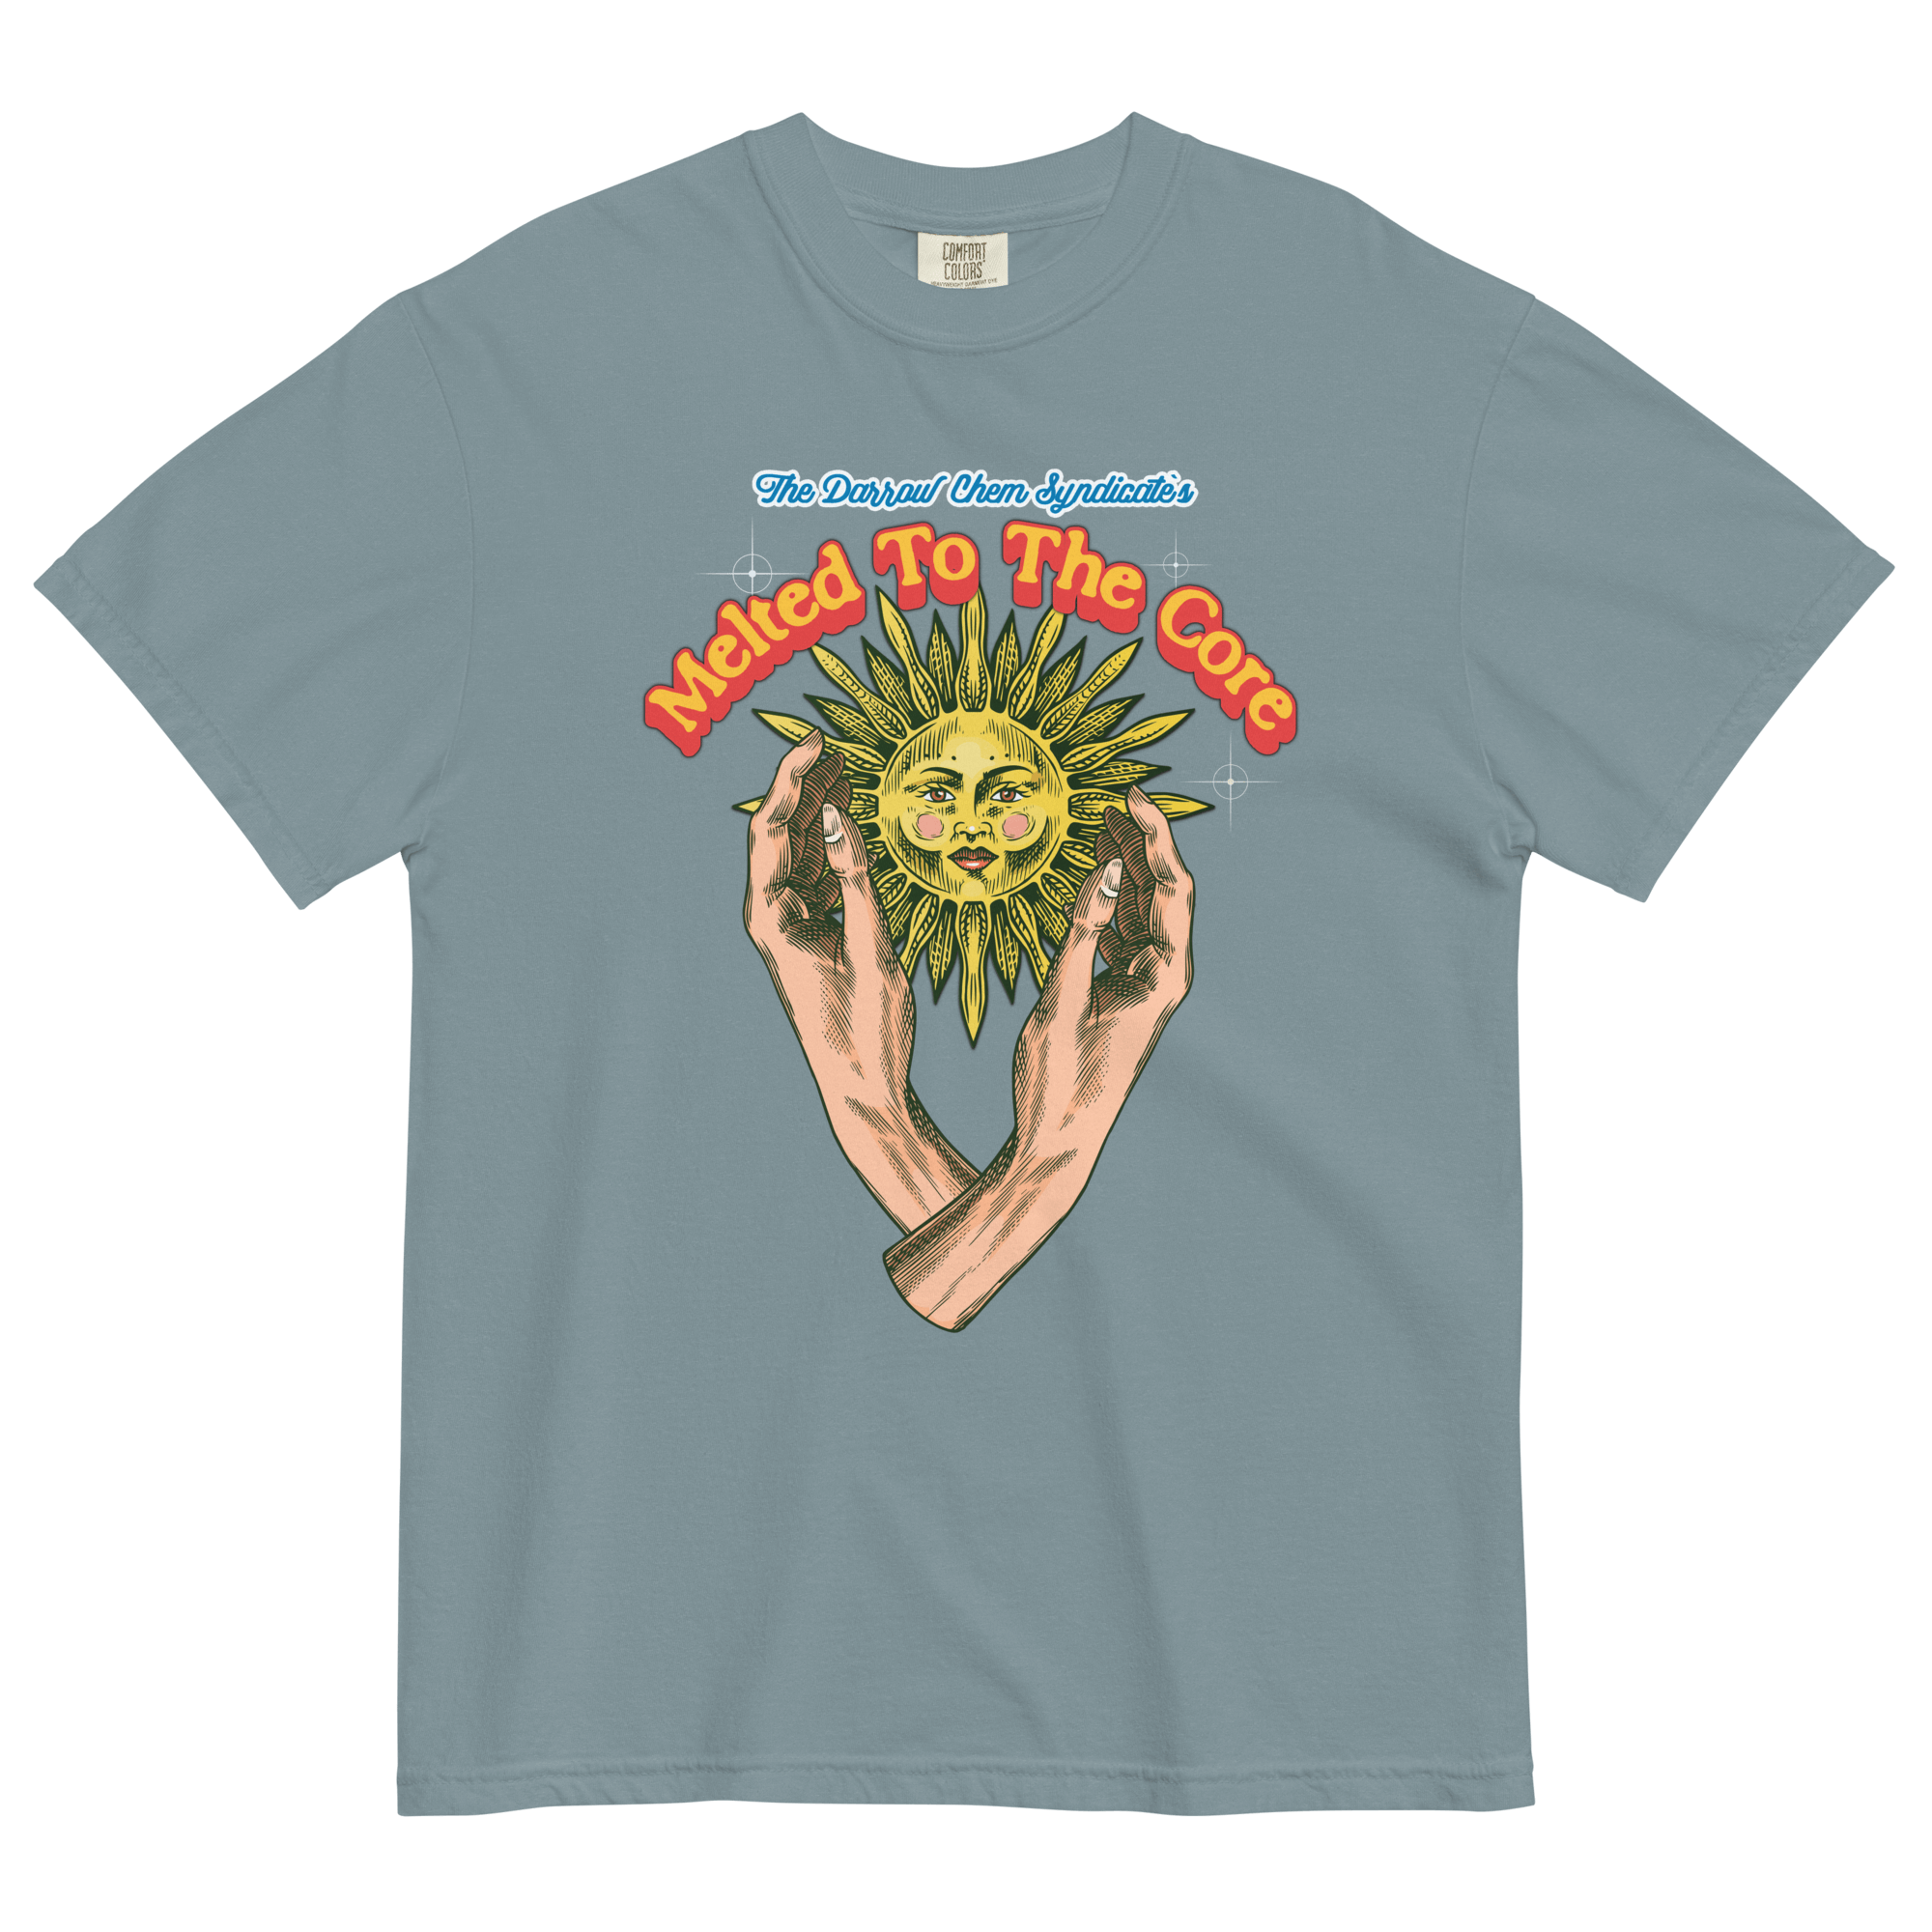 Melted To The Core T-shirtGet groovy in our Melted To The Core T-shirt! Premium cotton, hip style, made for comfort. Dive into cool streetwear now. • 100% ring-spun cotton • Fabric weight: 6.1 oz/yd² (206.8 g/m²) • Garment-dyed • Relaxed fit • 7/8″ double